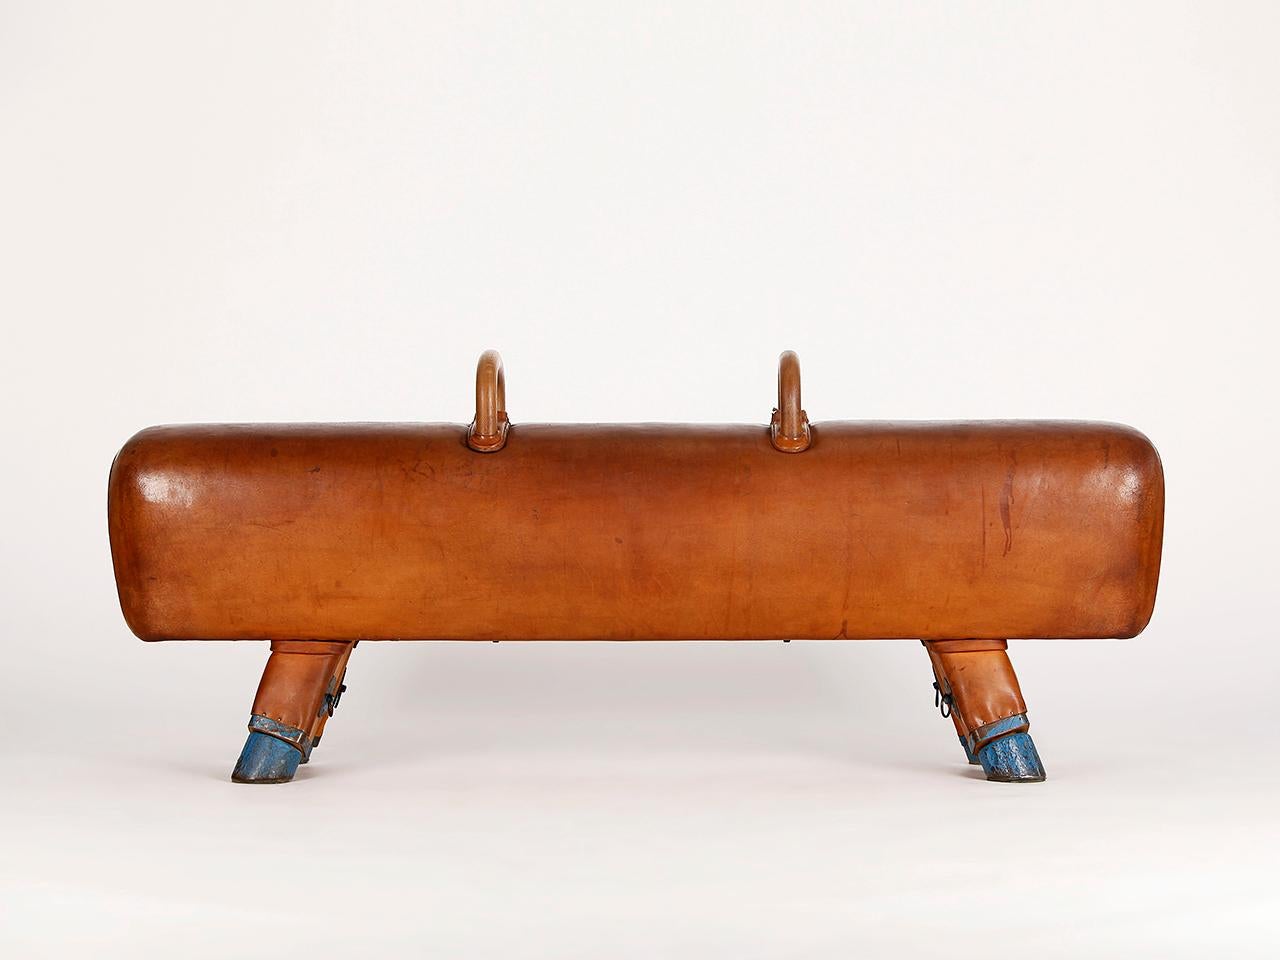 Pommel horse from former Czechoslovakia. The legs were cut to a height of 54cm. The thick leather has been cleaned and the patina was retained. The handles can be removed for comfortable seating. The wooden handles were restored. Very nice Vintage